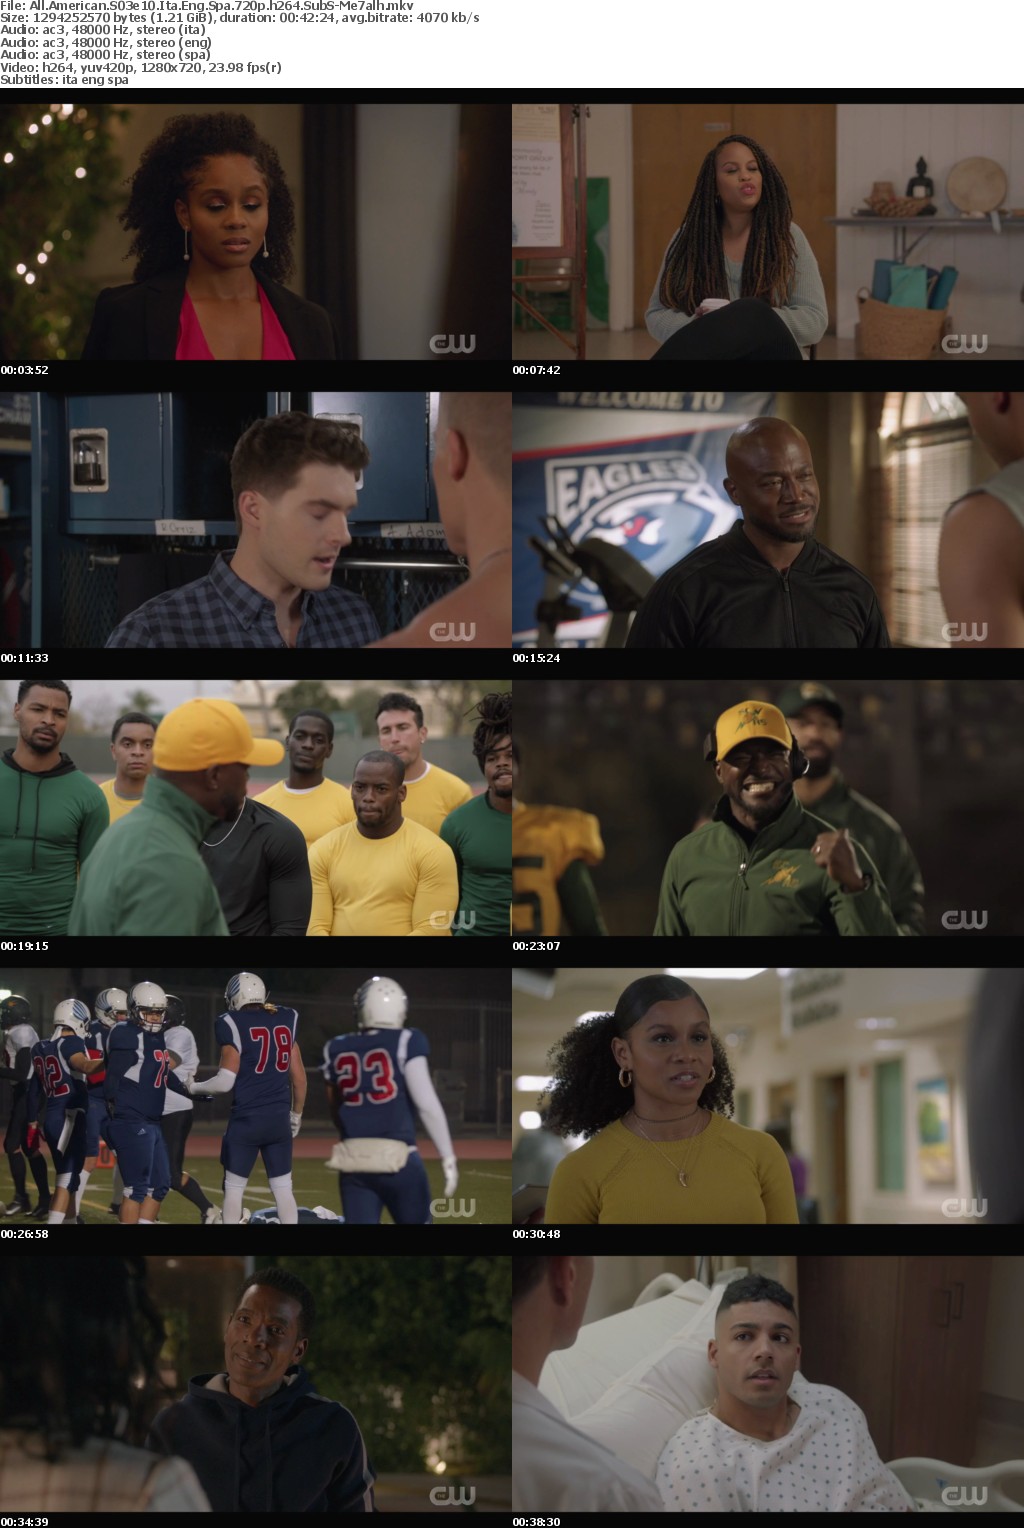 All American S03e09-11 720p Ita Eng Spa SubS MirCrewRelease byMe7alh